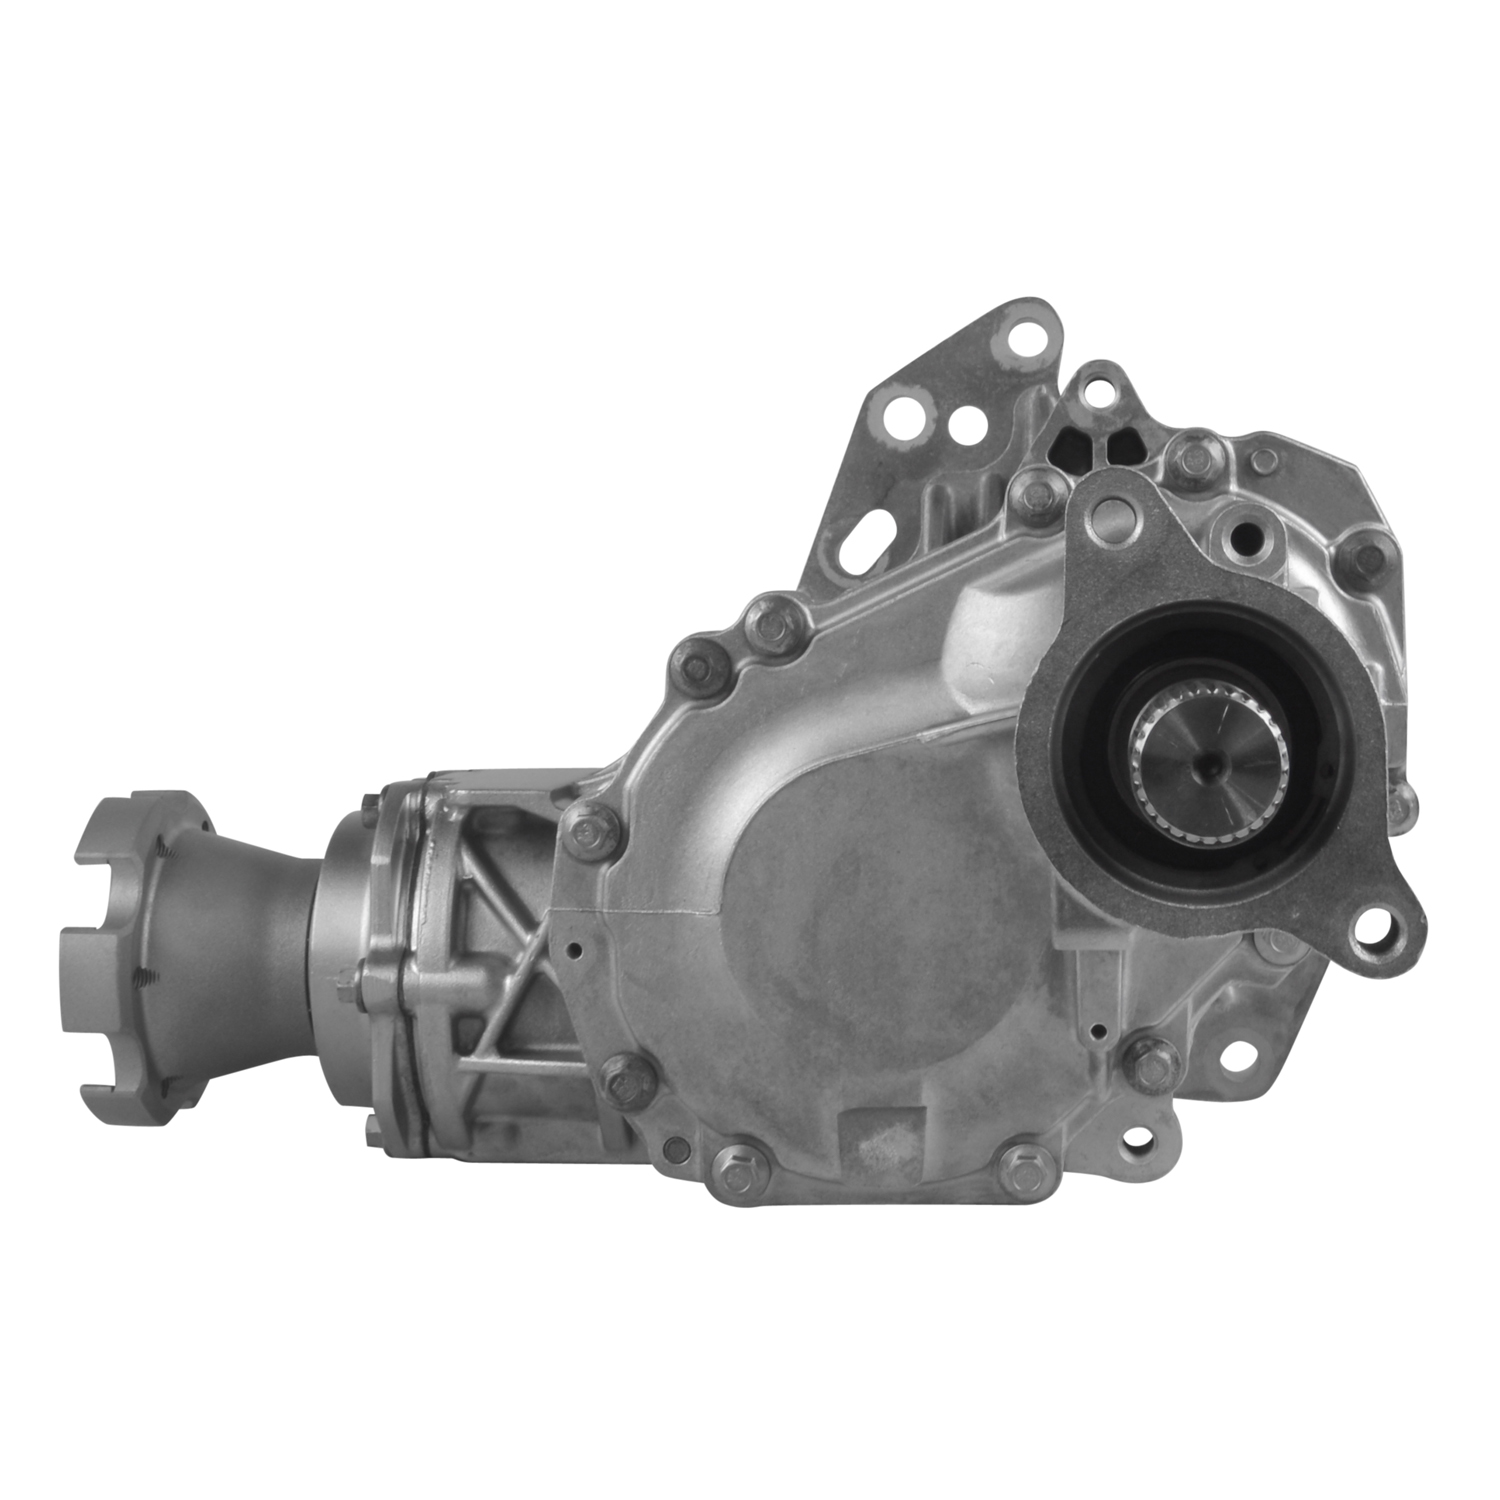 Zumbrota Remanufactured G760 Transfer Case for Chevrolet Equinox 3.0L and 3.6L